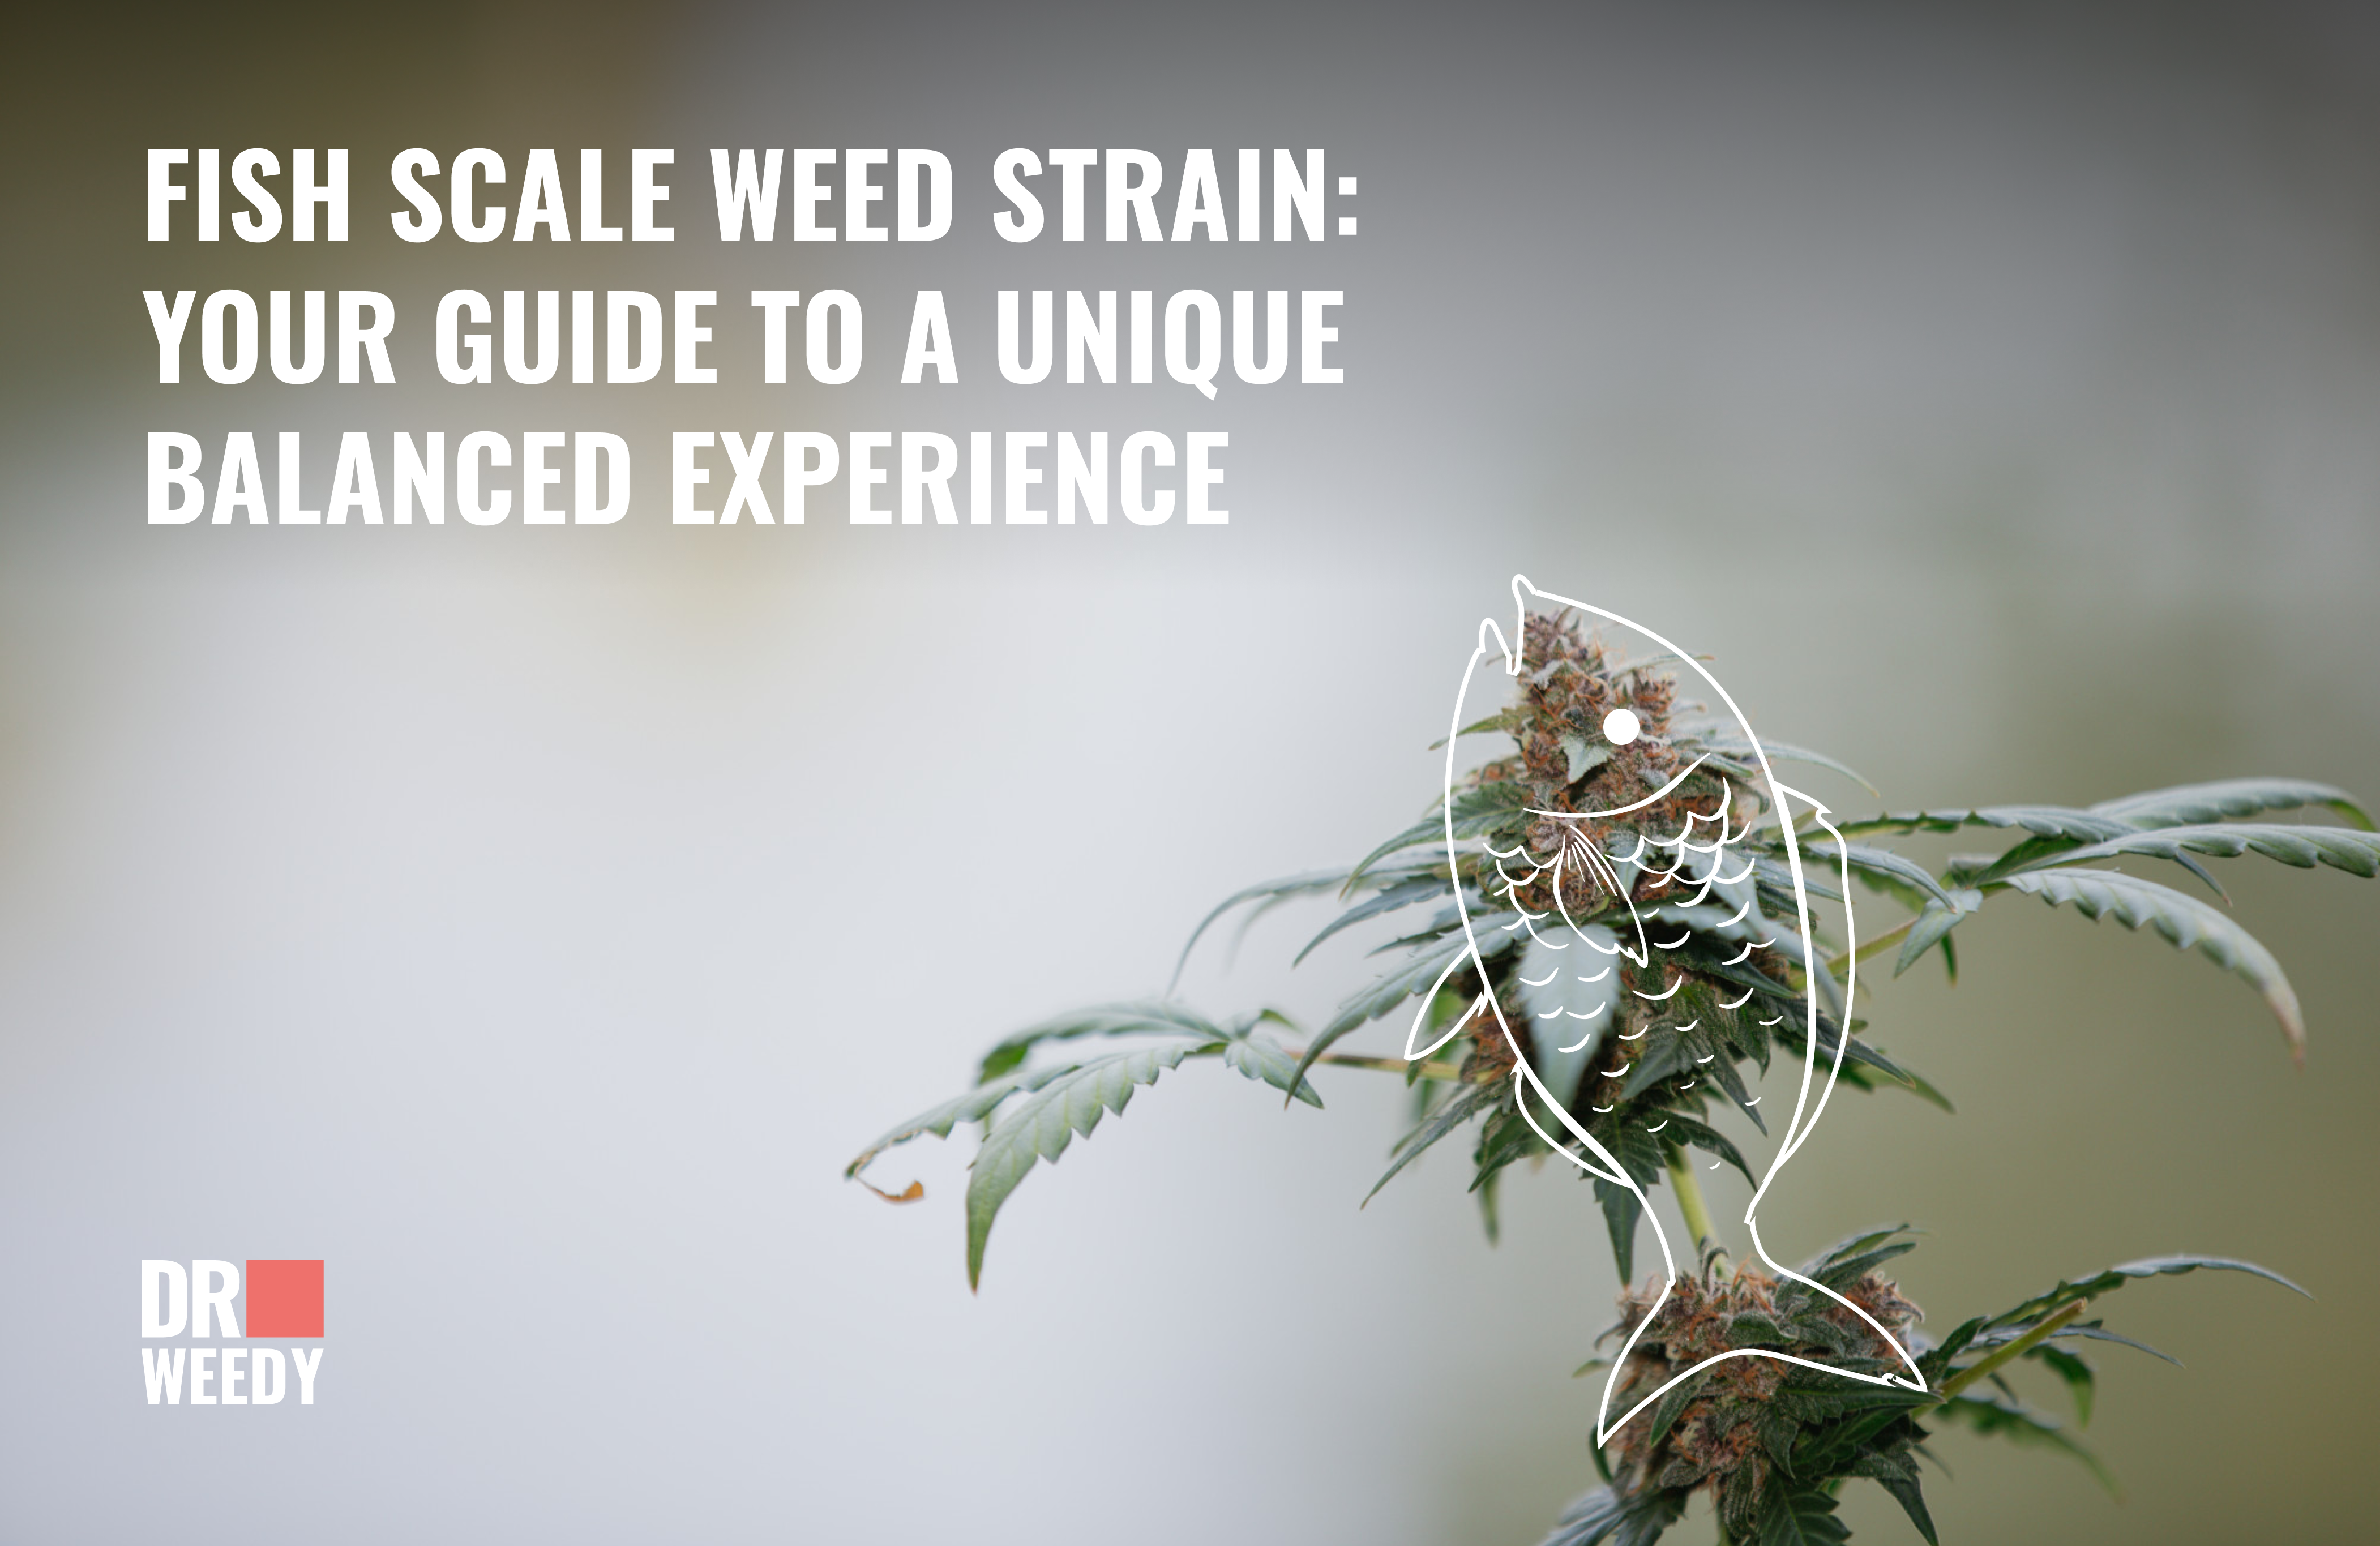 Fish Scale Weed Strain: Your Guide to a Unique Balanced Experience